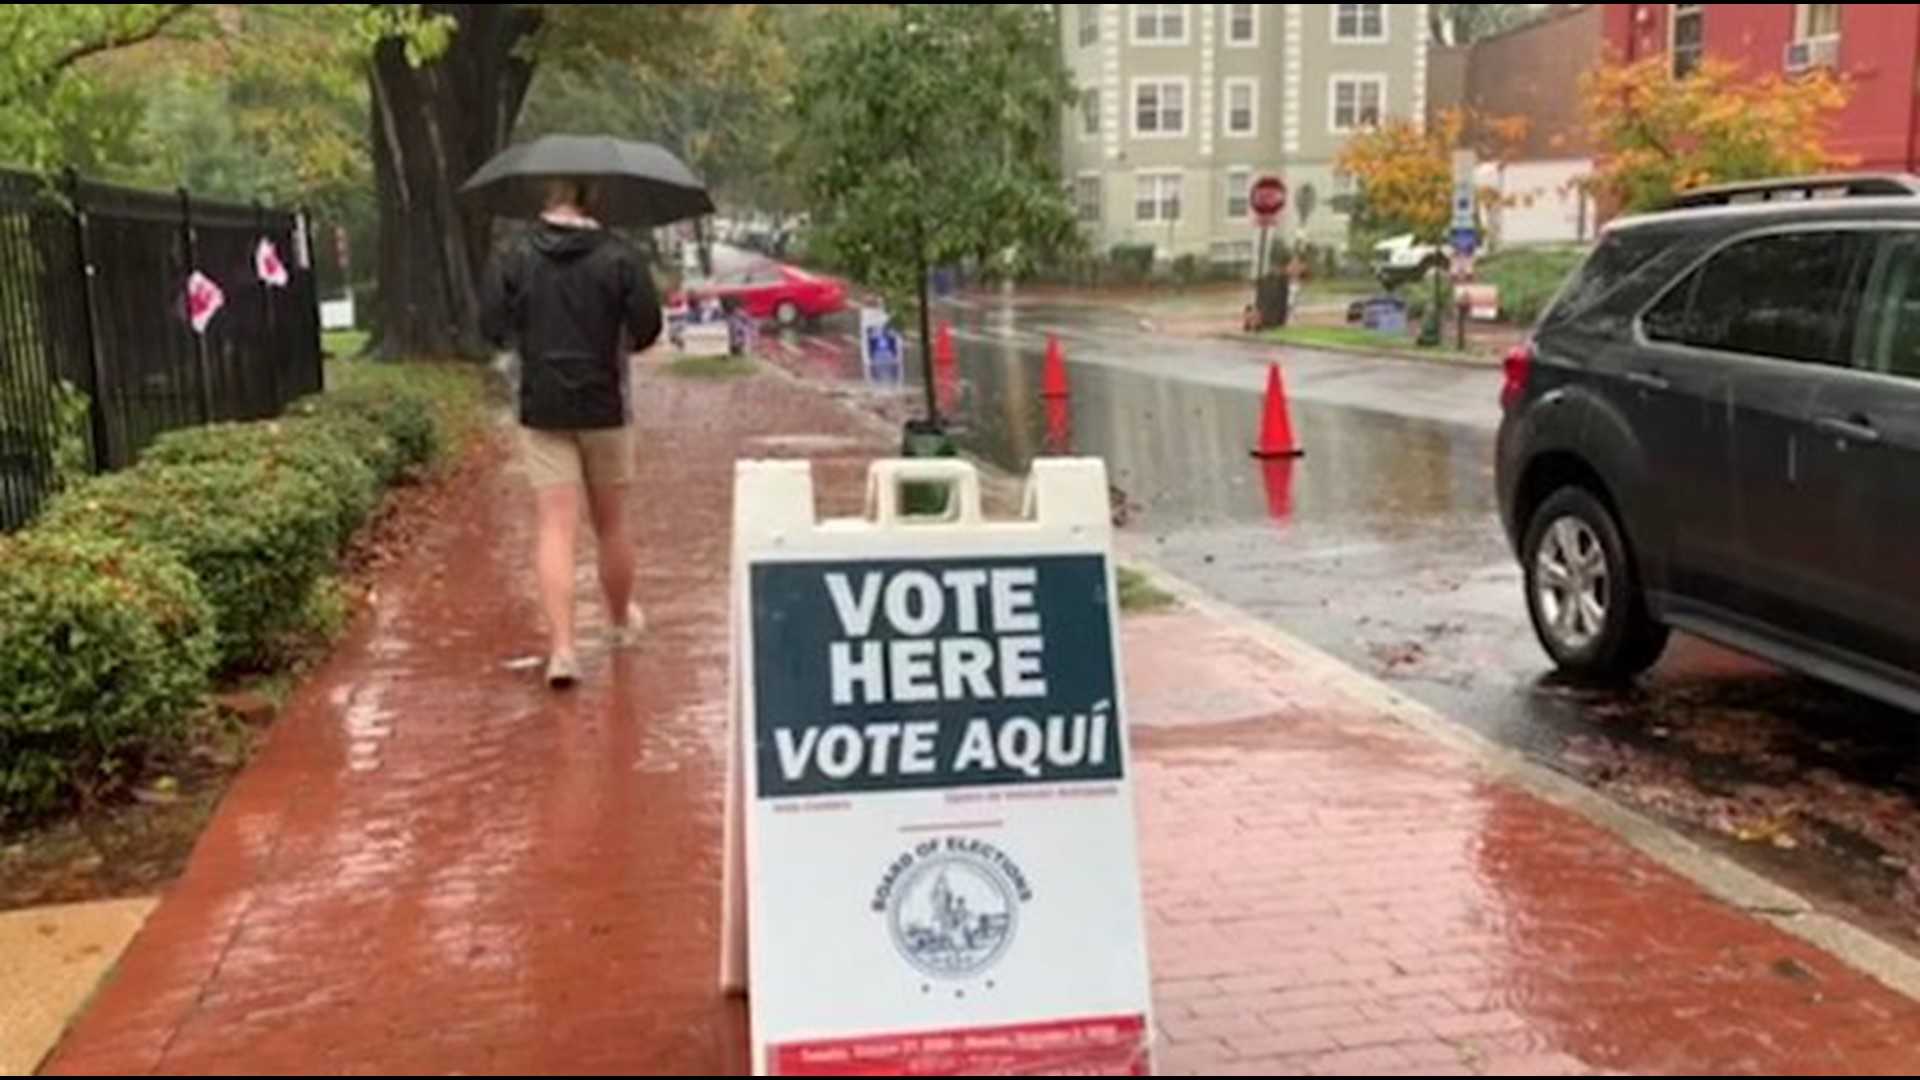 A light rain fell on Washington, D.C., on Oct. 29, as residents of the city went to vote early.